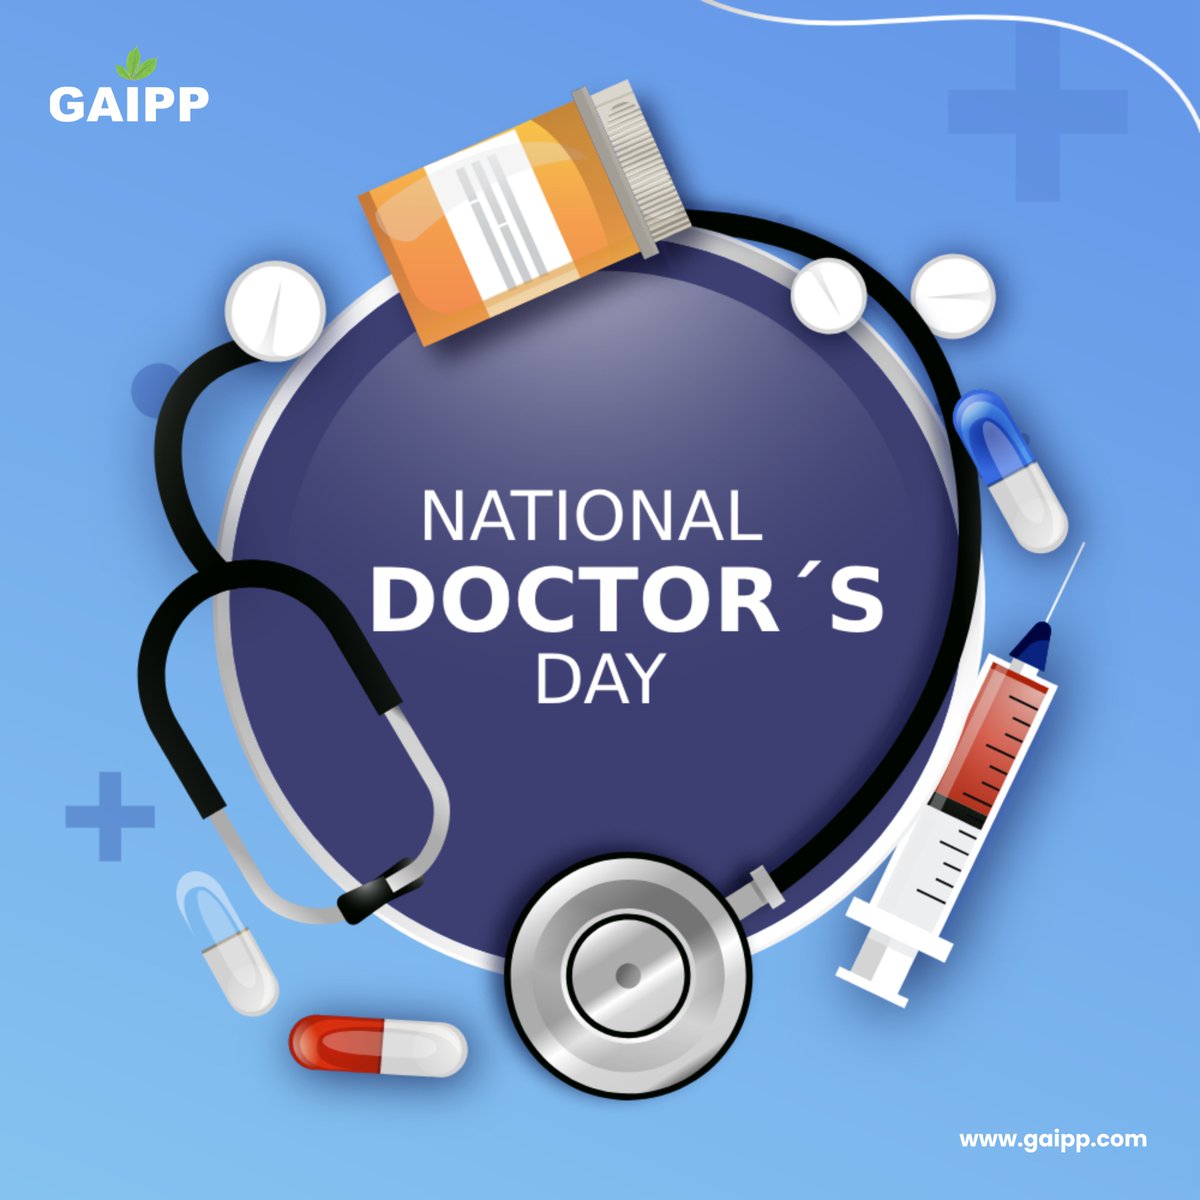 Happy Doctor's Day to all the amazing healthcare heroes out there! 🩺💙 

#DoctorsDay #Gaipp #HealthcareHeroes #Grateful #ThankYouDoctors #HealingHands #MedicalProfession #SavingLives #CompassionateCare #Inspiration #MedicalHeroes #DoctorAppreciation